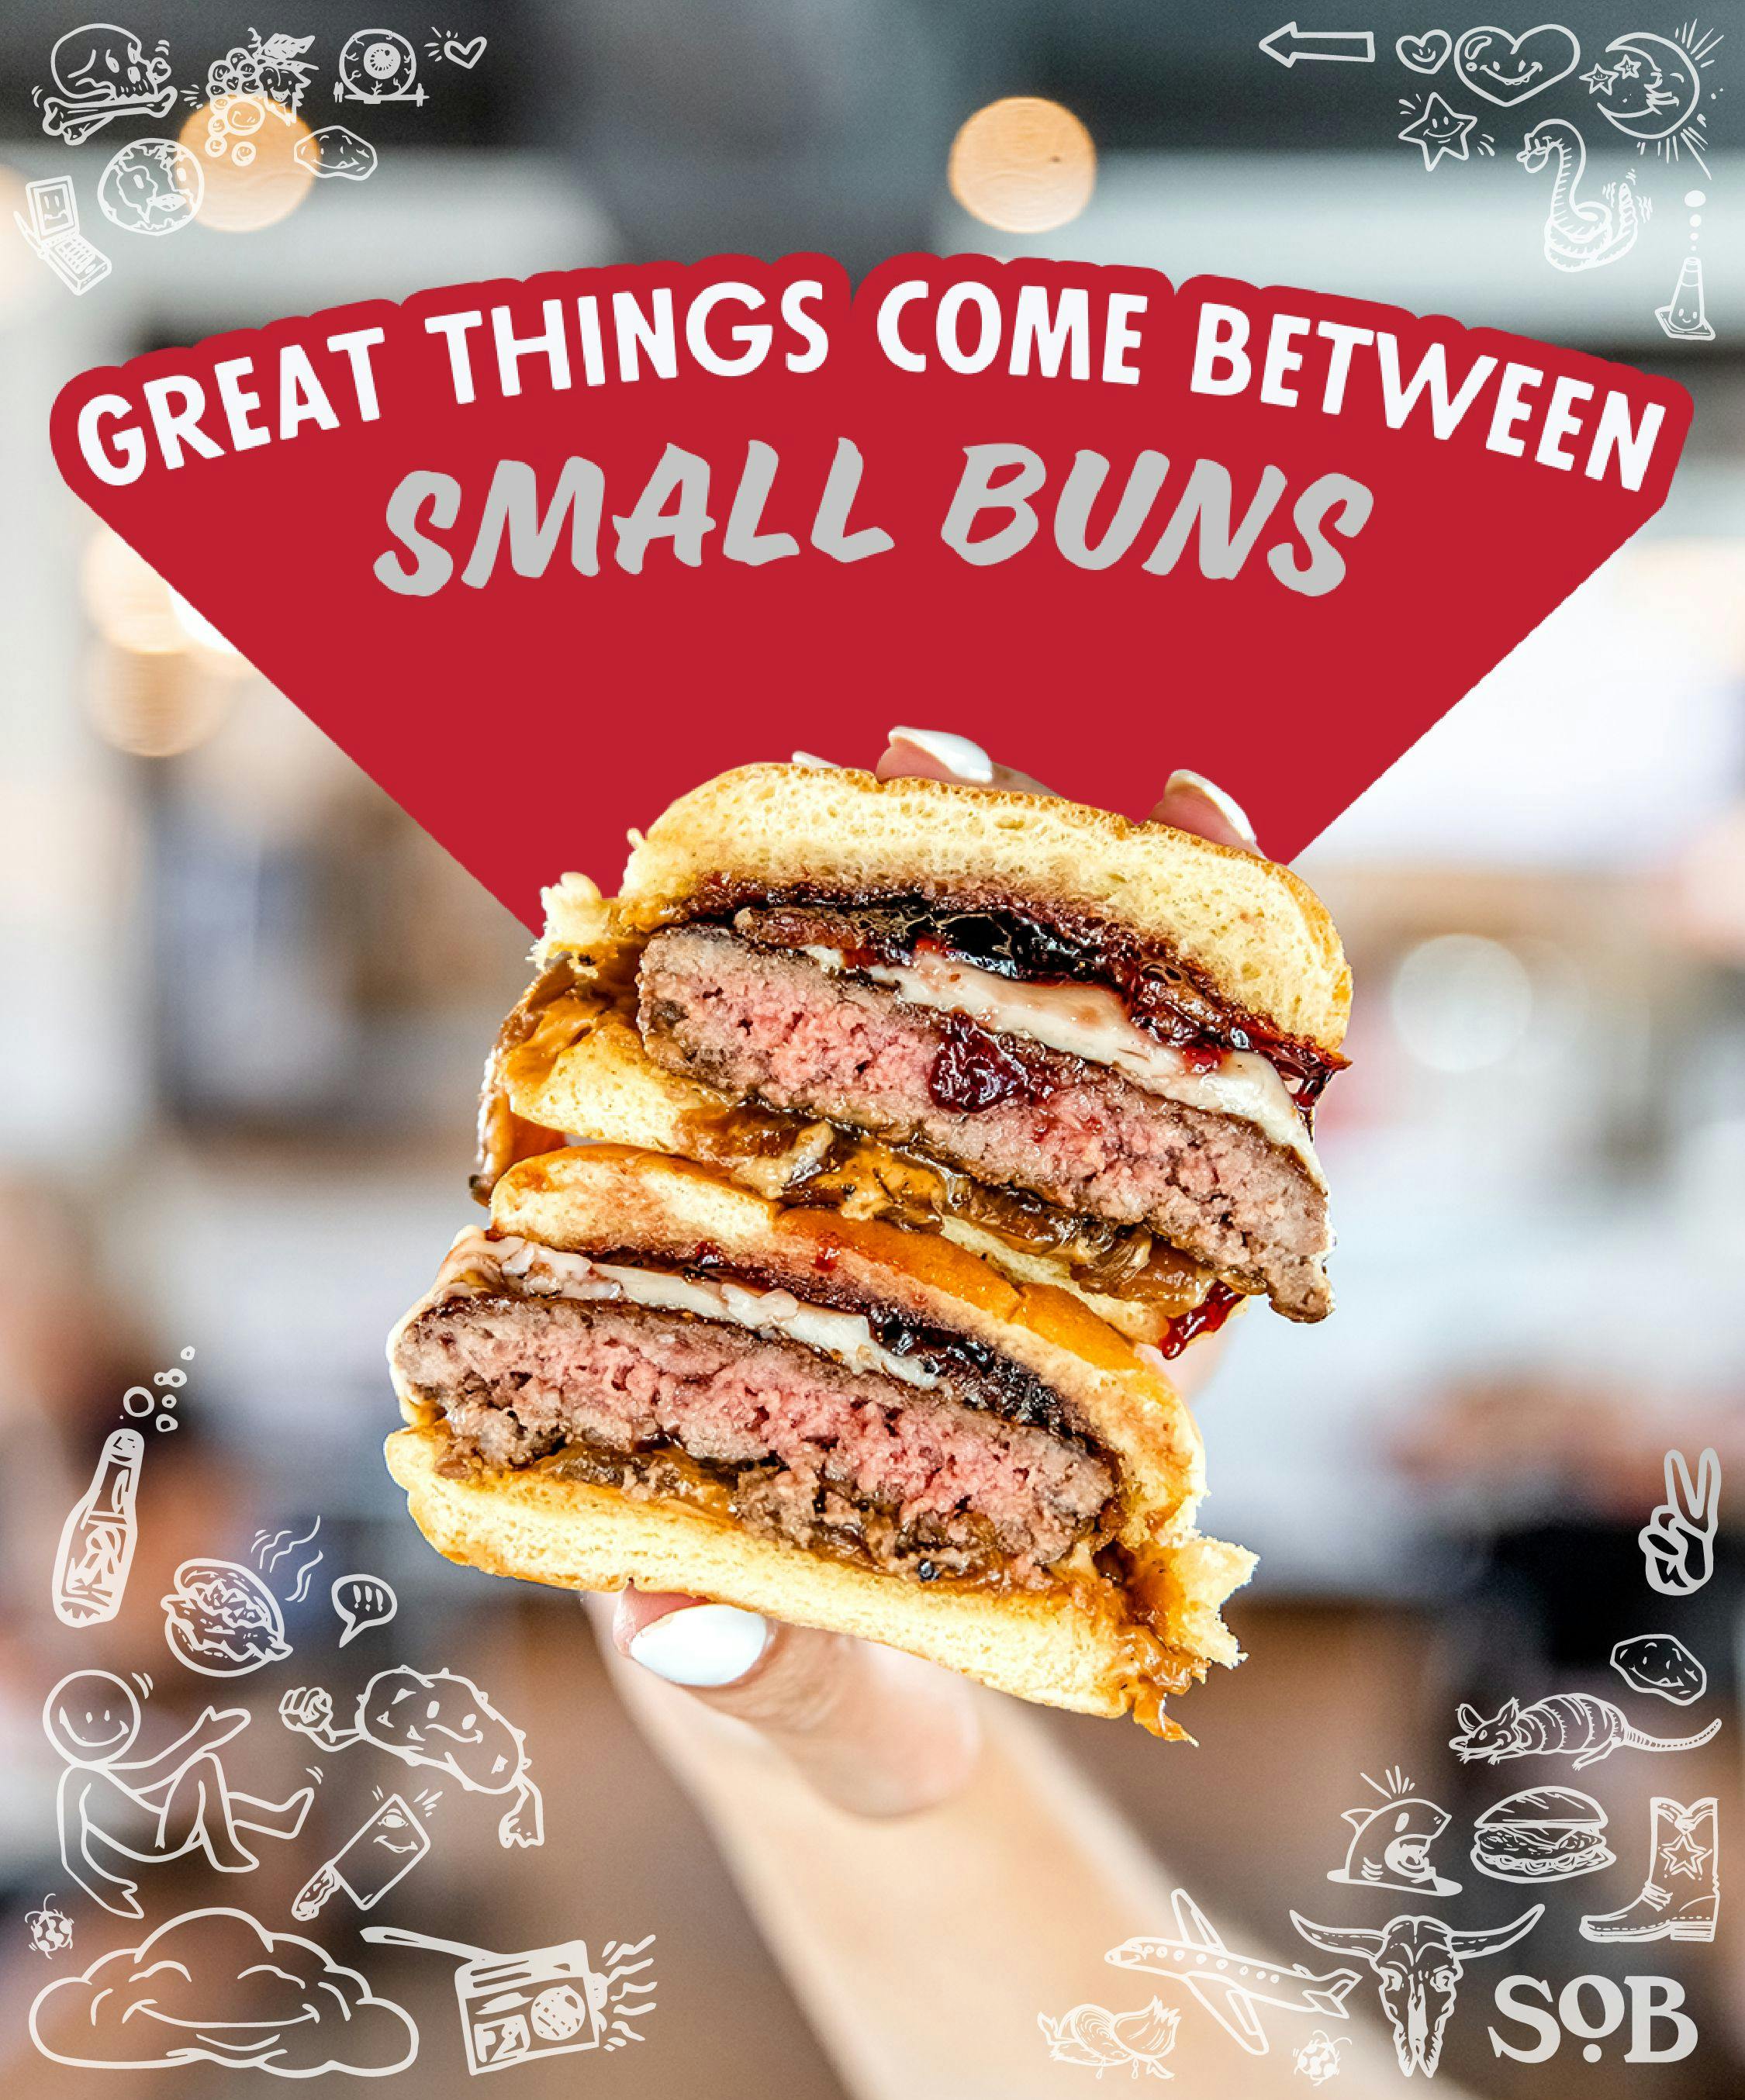 Great Things Come Between Small Buns